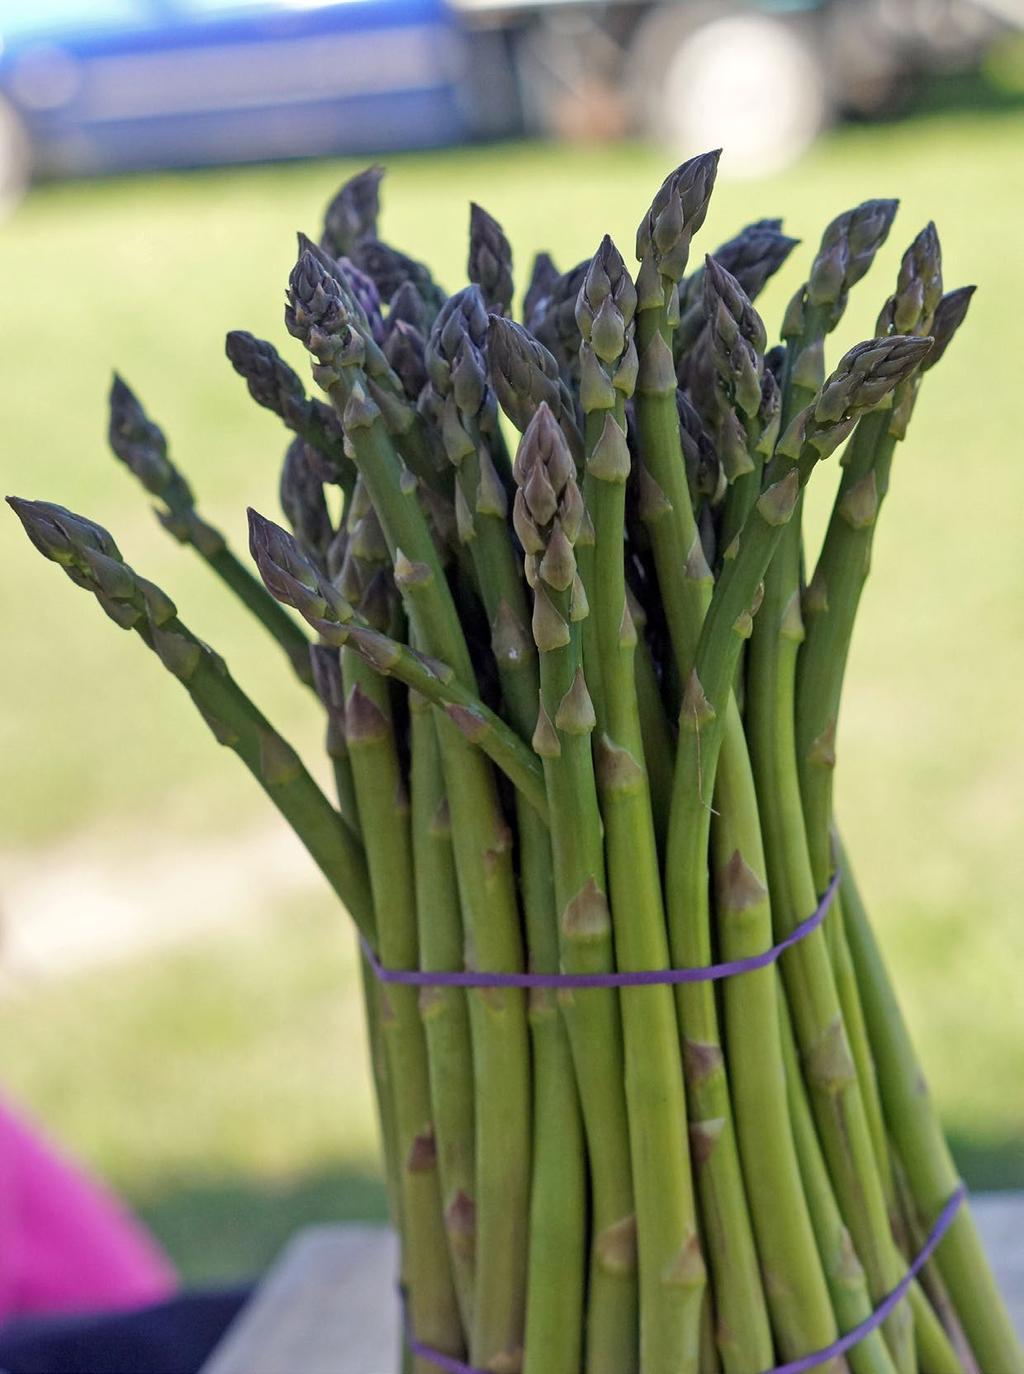 Casey, Cardinia, and the Mornington Peninsula What grows there? Almost all of Australia s asparagus production (90%) occurs in Casey- Cardinia thanks to rich, peaty soils.